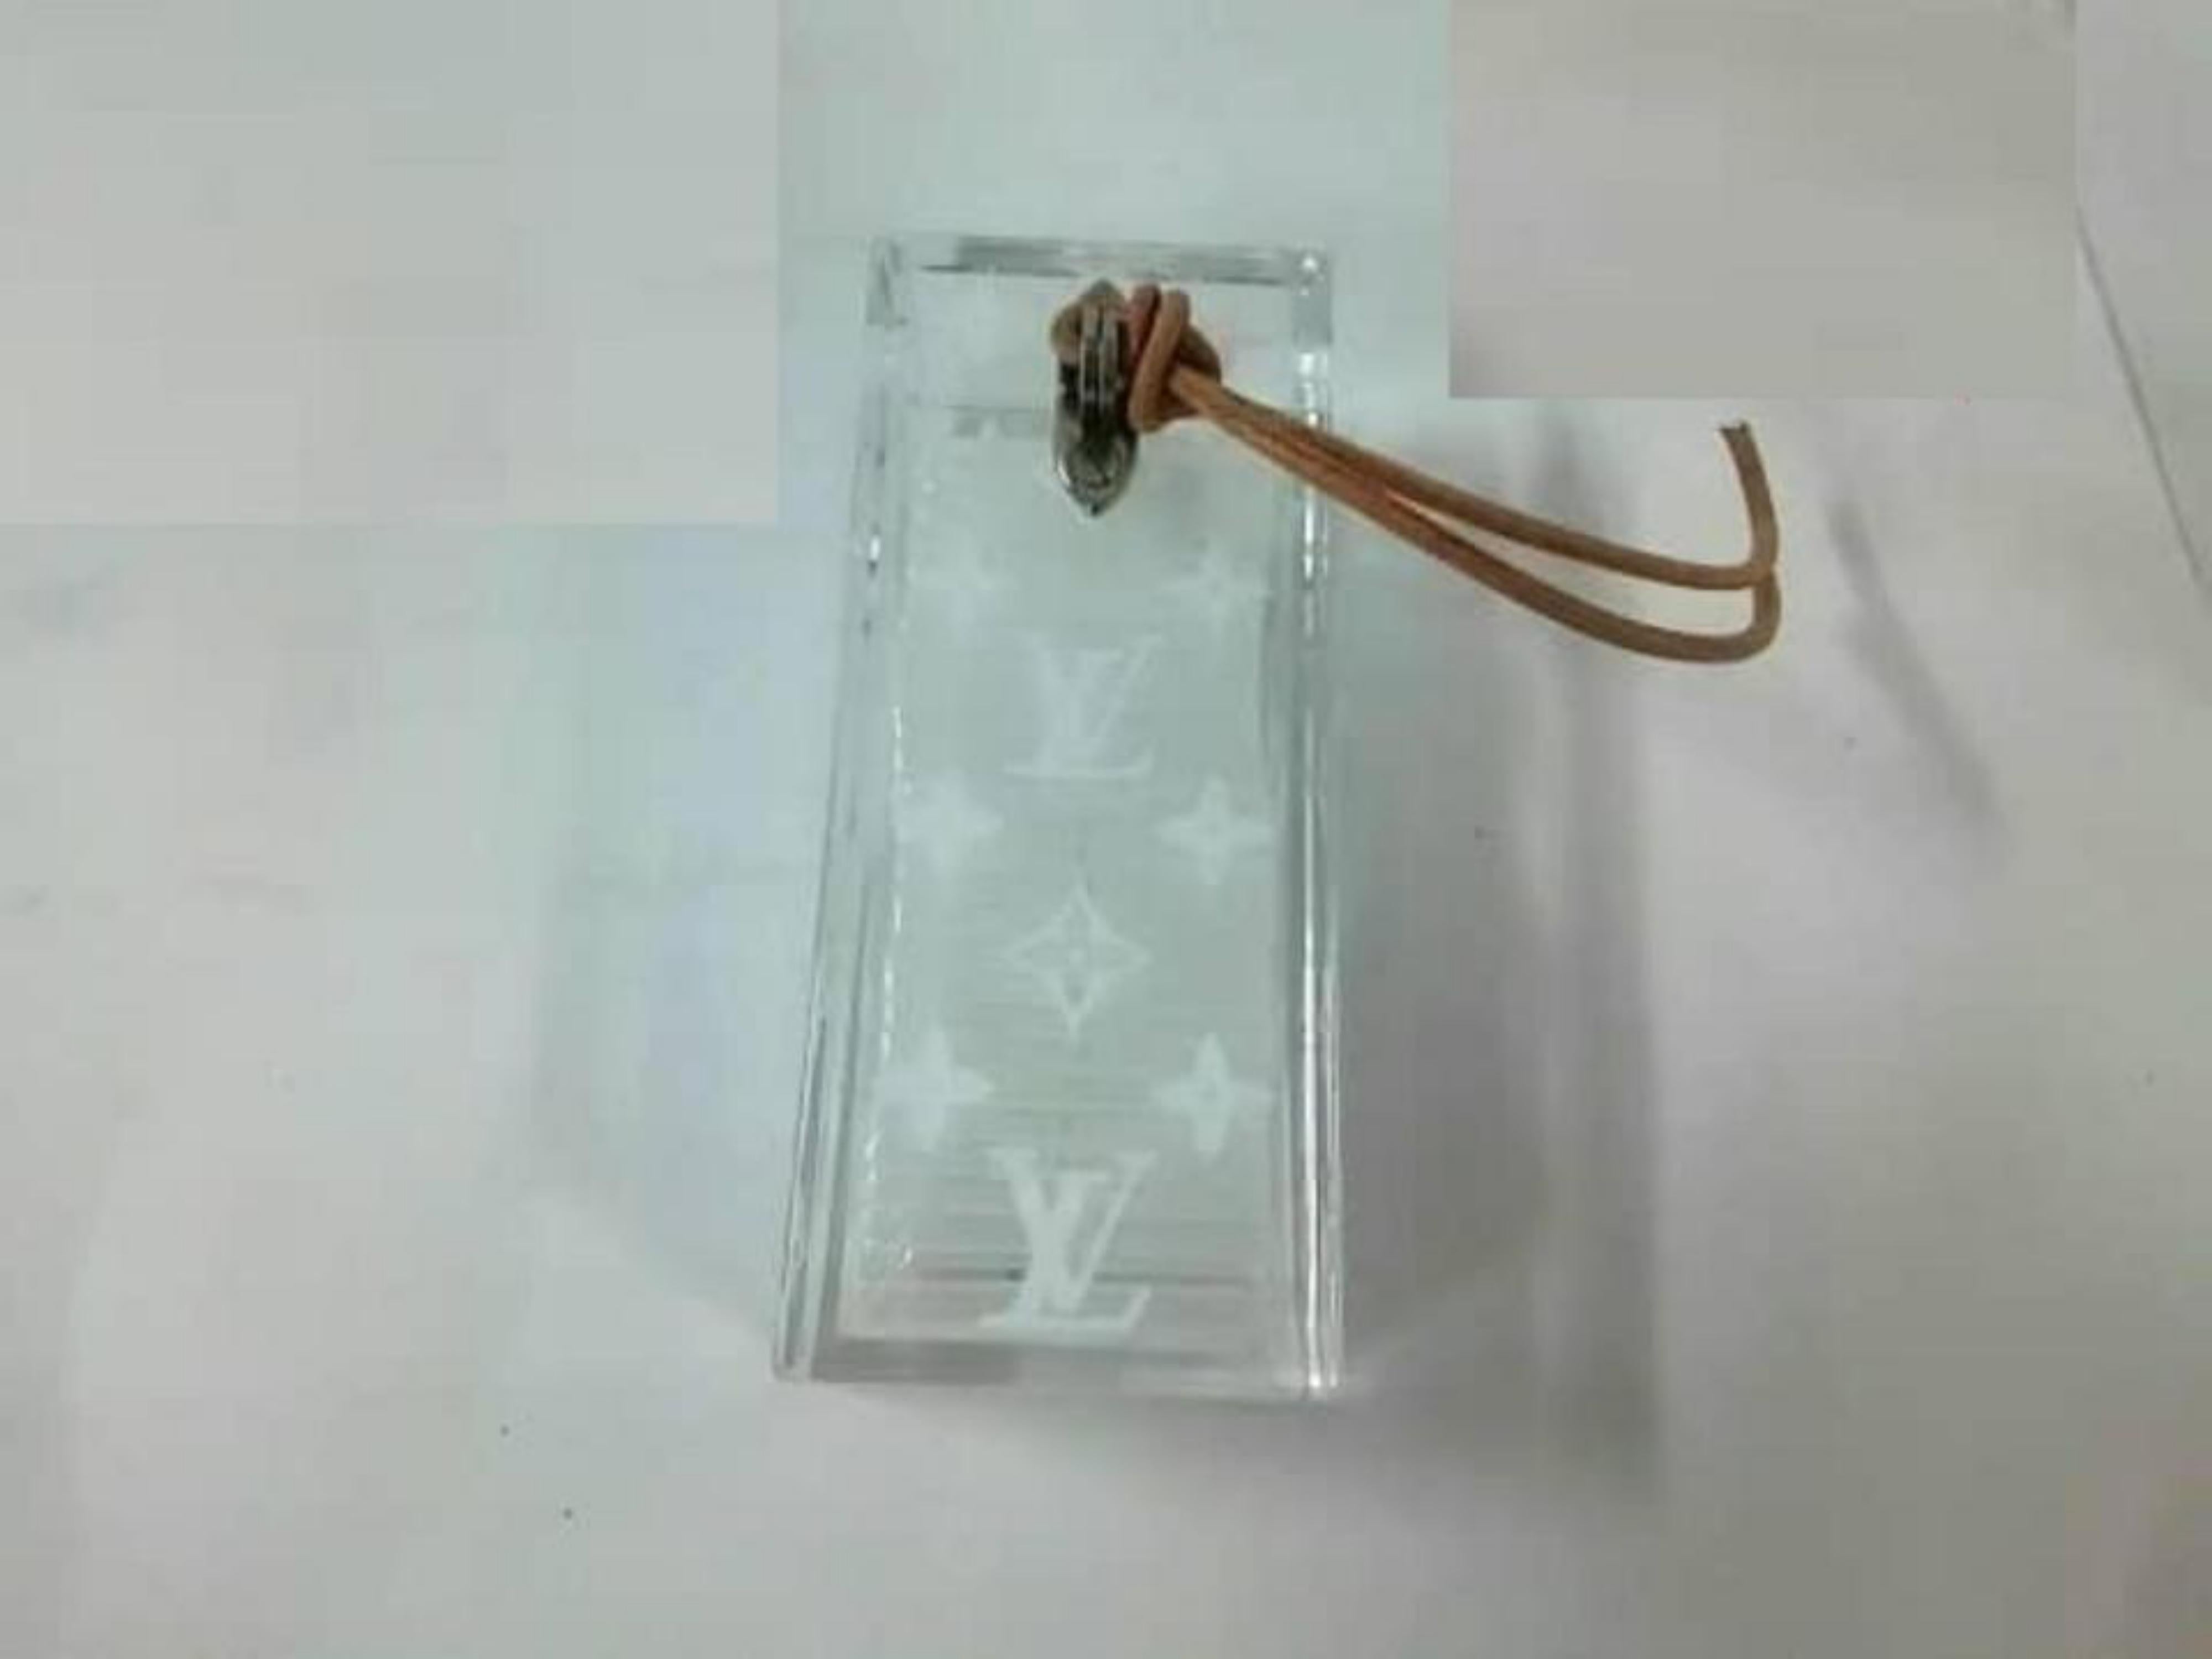 Louis Vuitton Clear (Ultra Rare) Monogram Dominoes Case with Domino Set 234035 For Sale 1